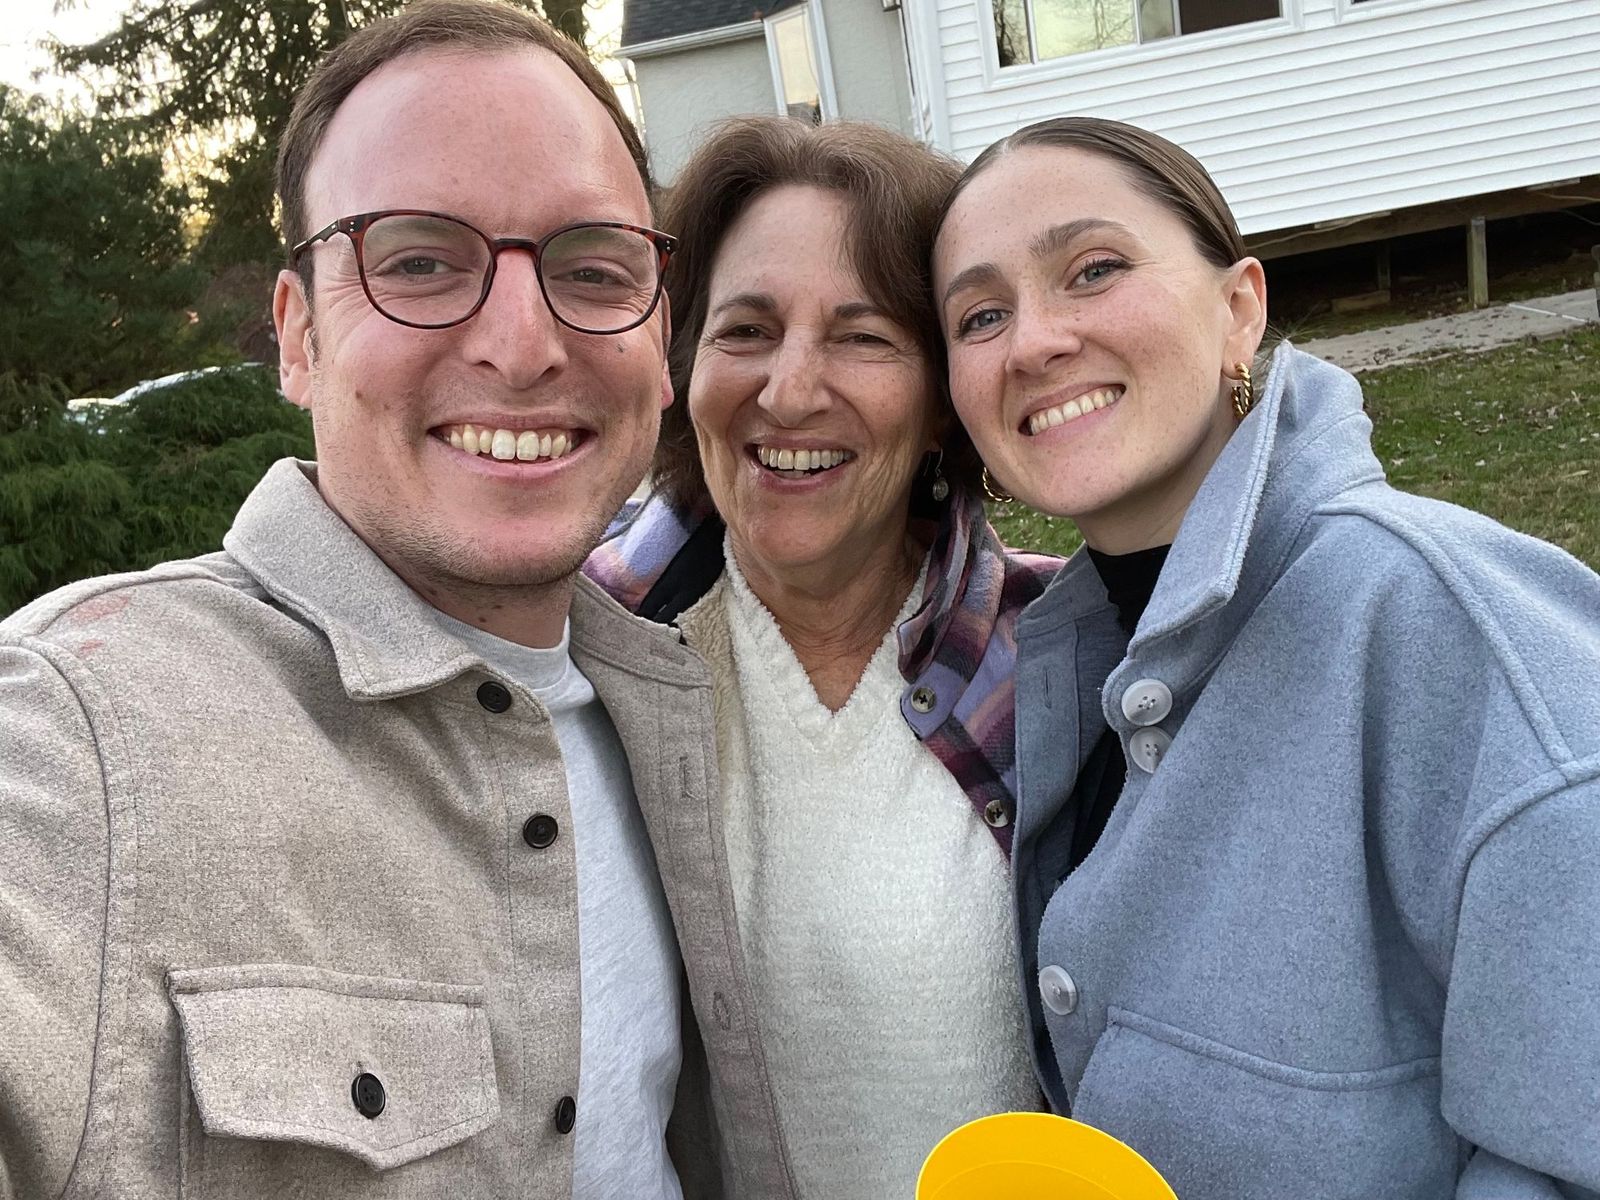 Me, mom and the wife at Thanksgiving.